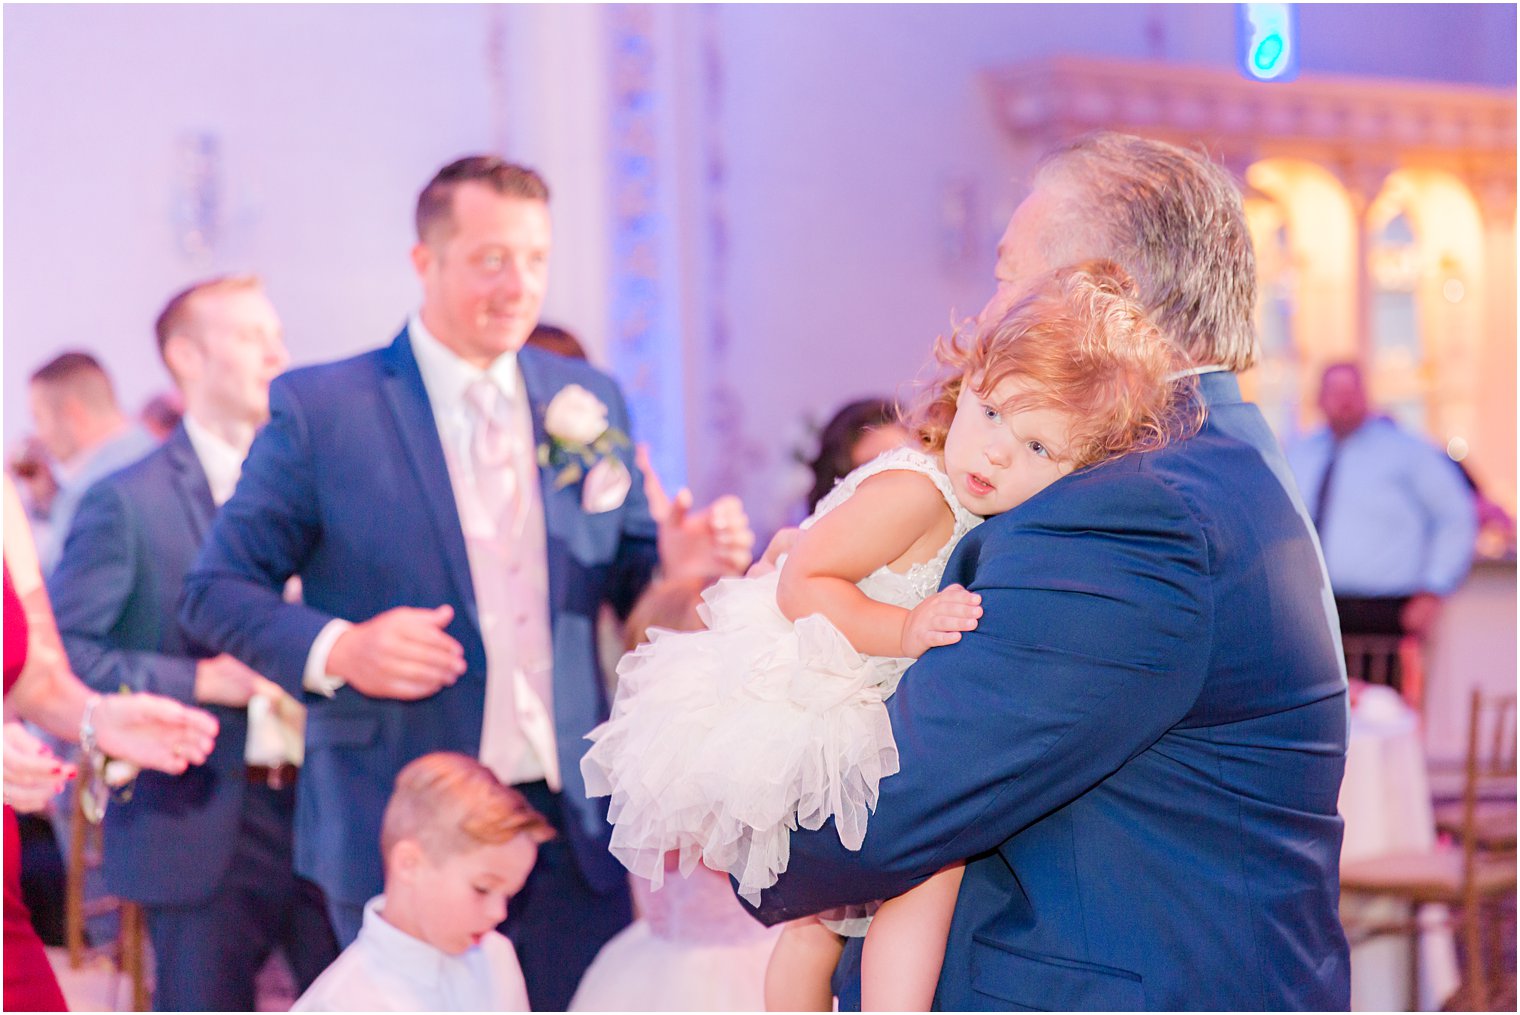 flower girl lays on grandfather's arm during wedding reception dancing 